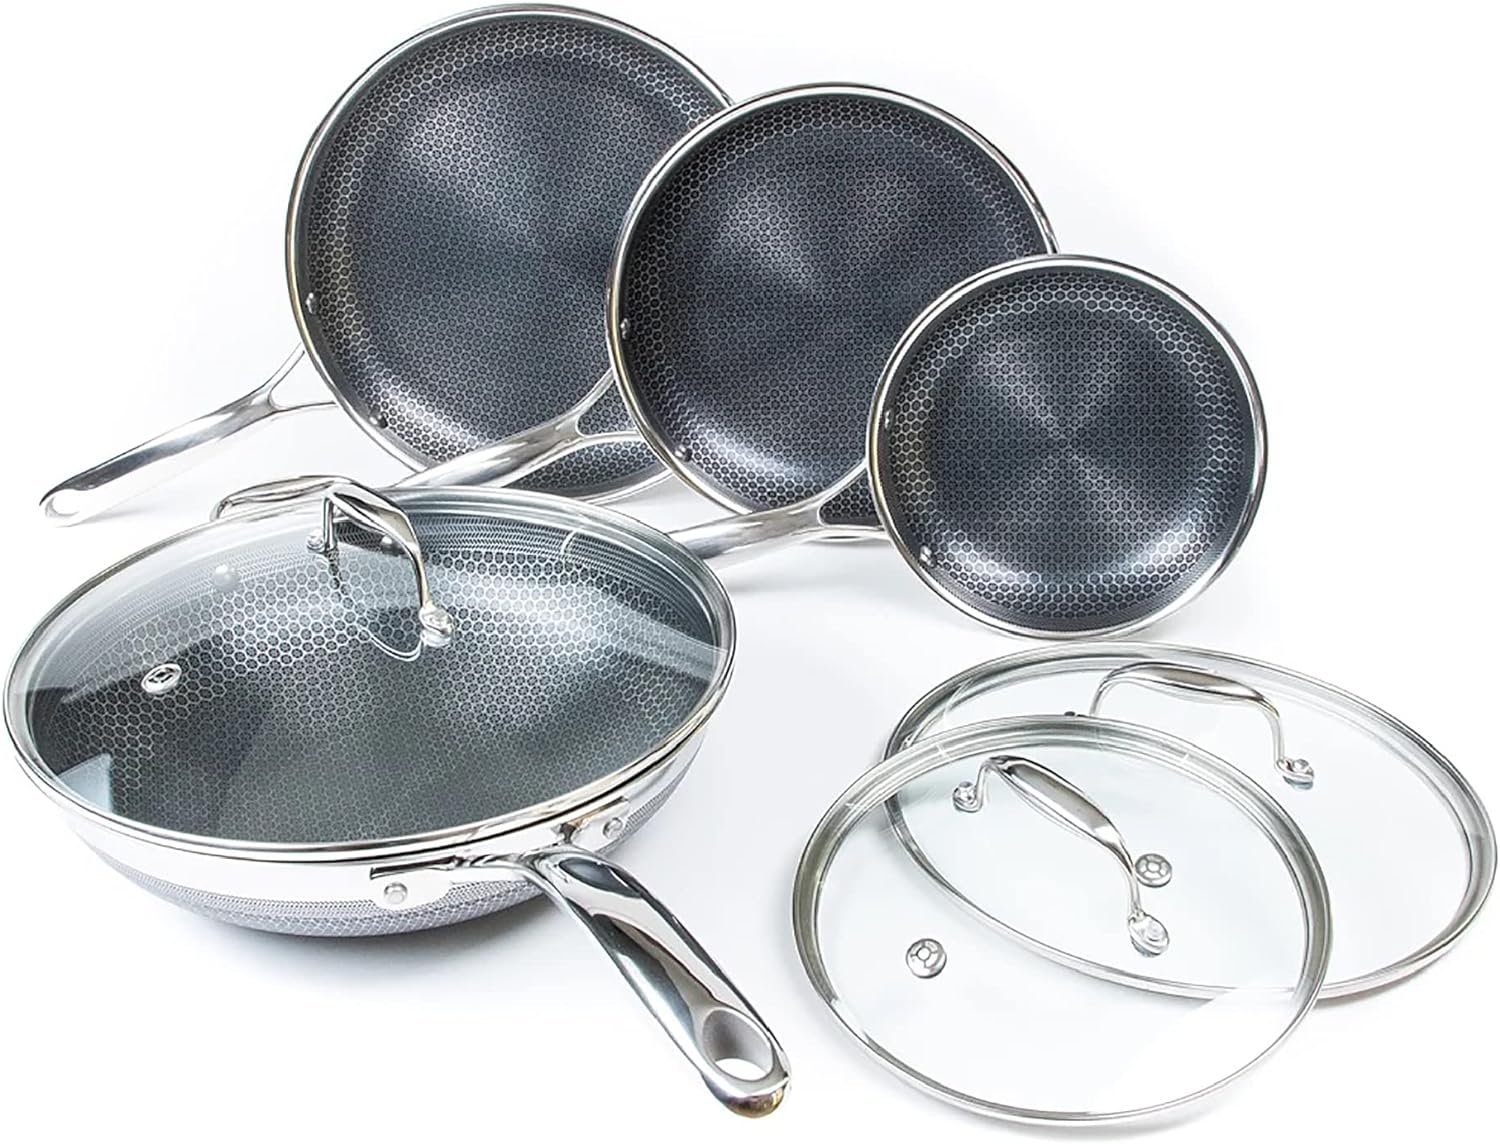 Hexclad 7-Piece Hybrid Stainless Steel Cookware Set 